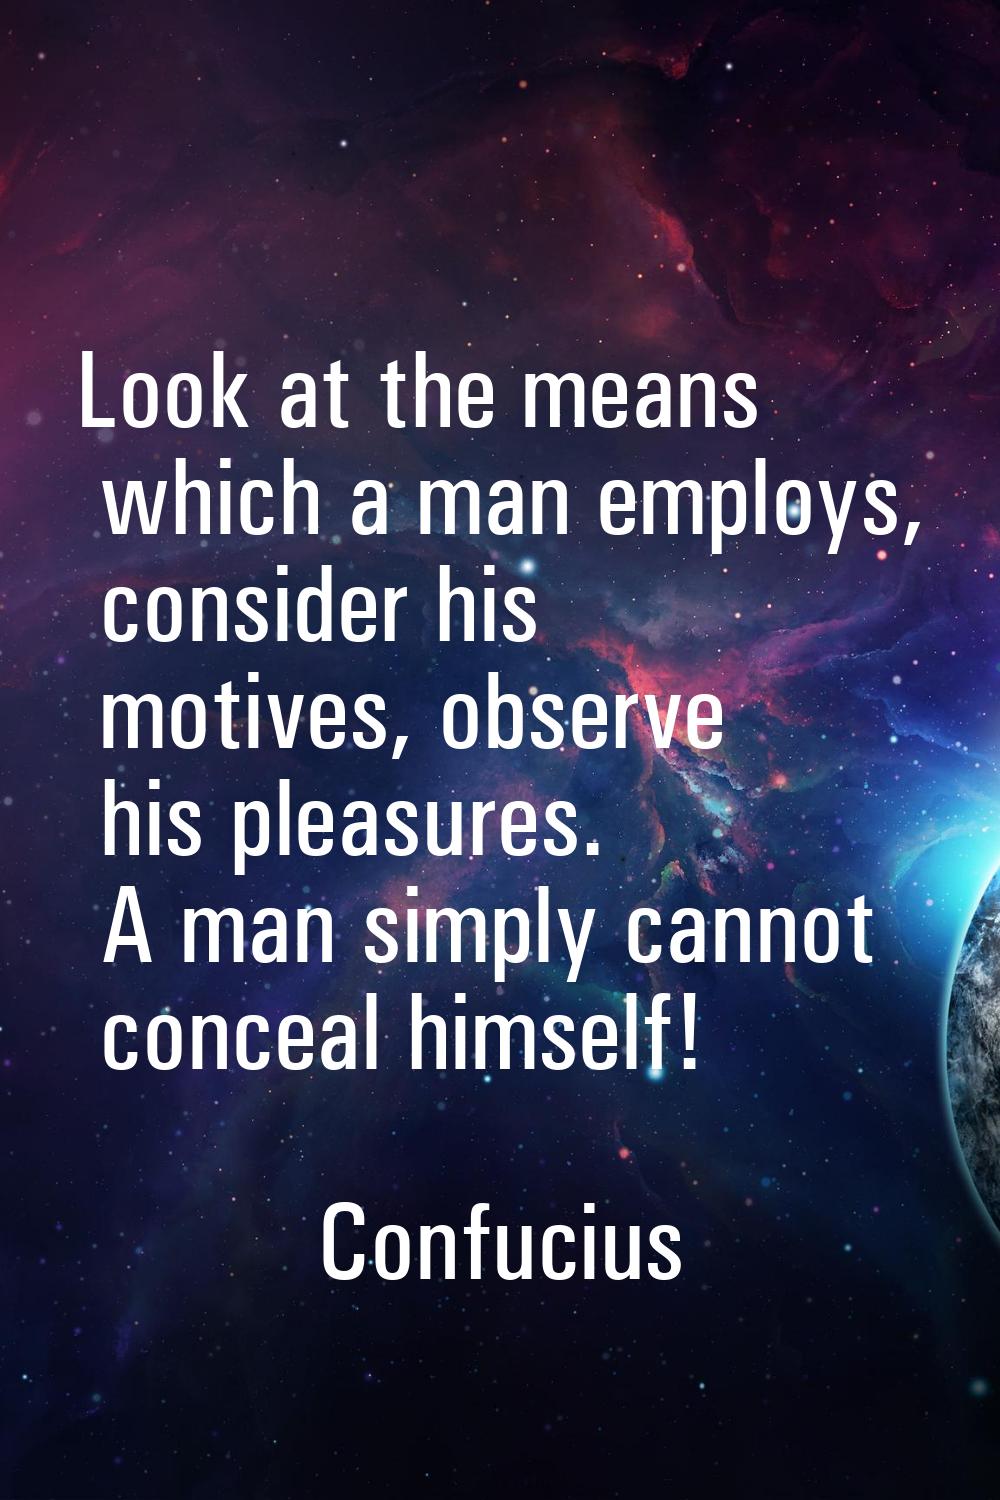 Look at the means which a man employs, consider his motives, observe his pleasures. A man simply ca